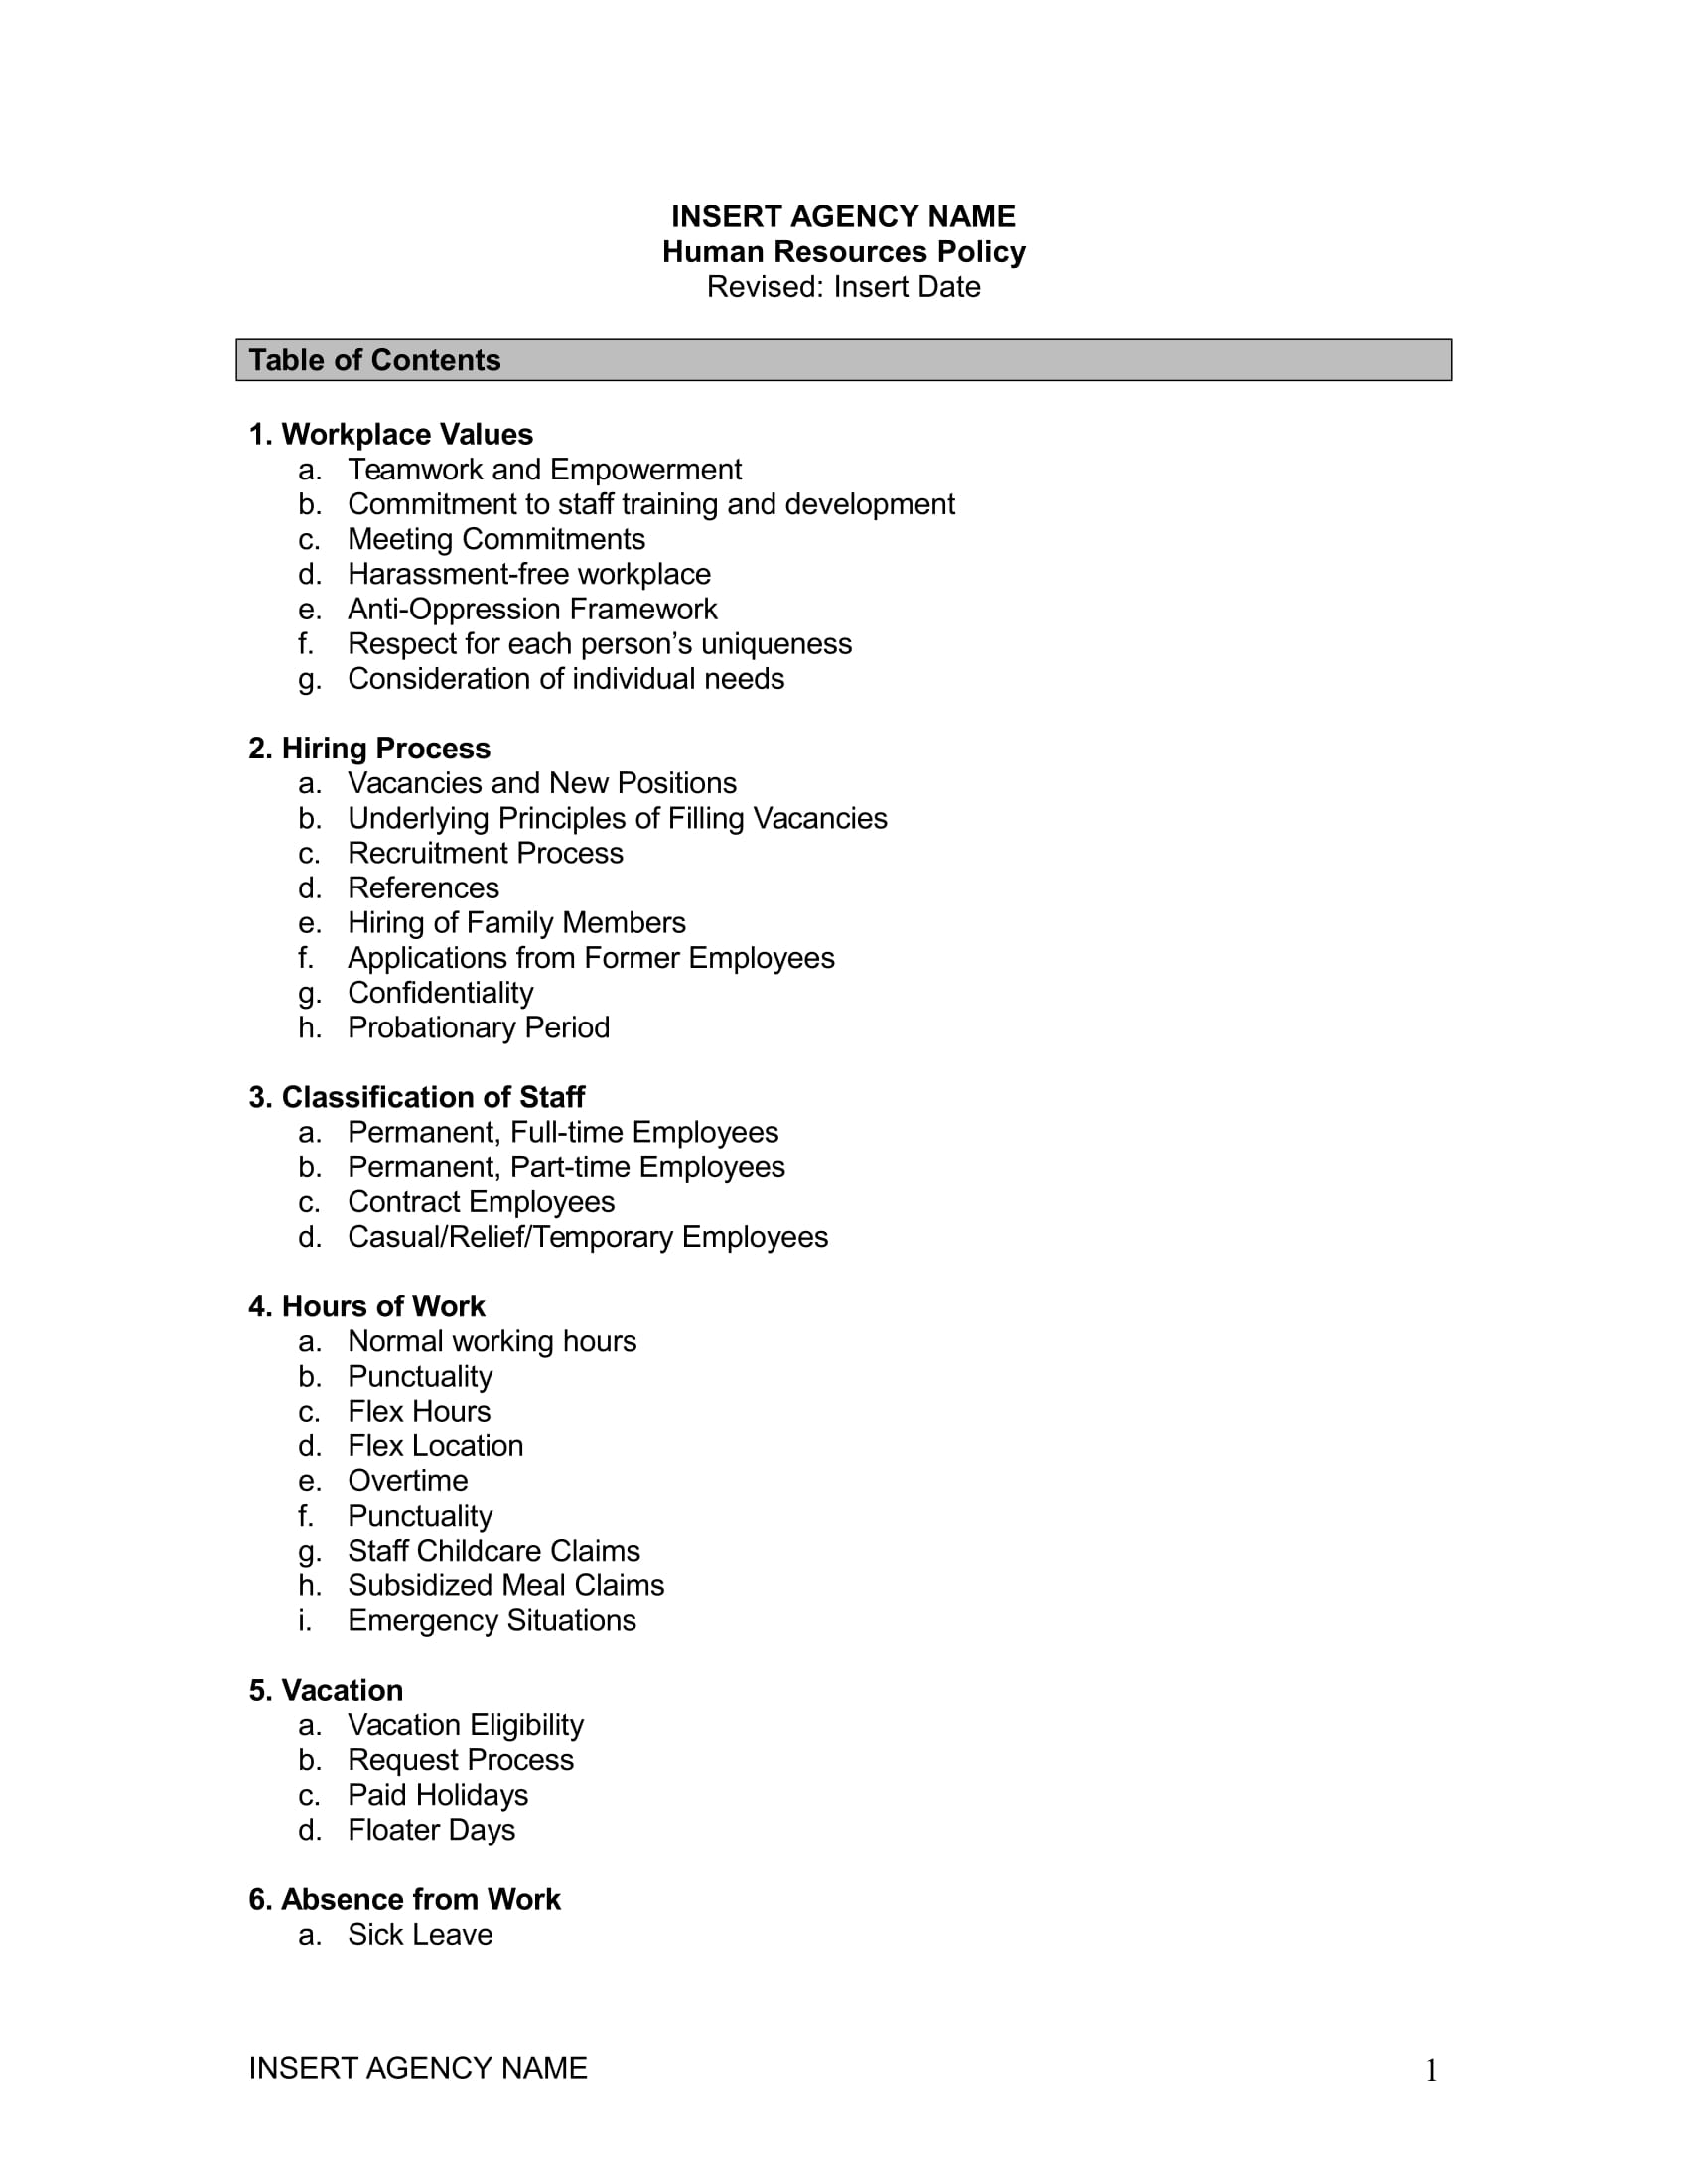 3 ar human resources policy sample2 01